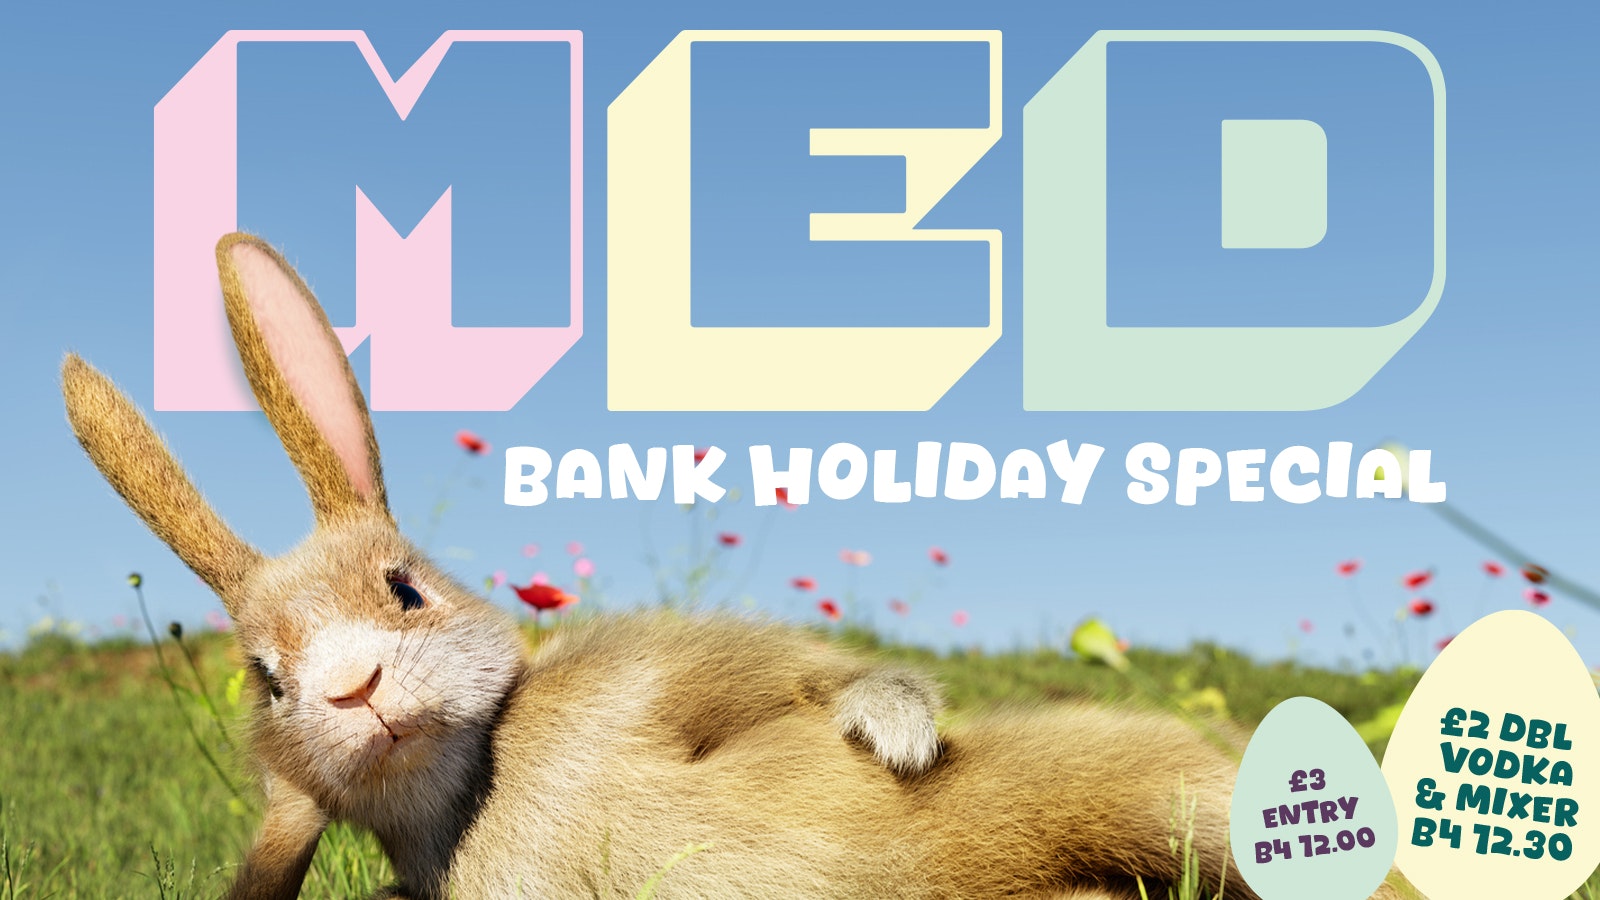 MEDICATION EASTER 🐣 MED GOOD FRIDAY 🐰﻿ @ ELECTRIK 💥 £2 VODKA / GIN DOUBLES B4 12.30 💥 MUSIC INCL. HOUSE / TECH HOUSE / CHART / POP / ROCK / INDIE